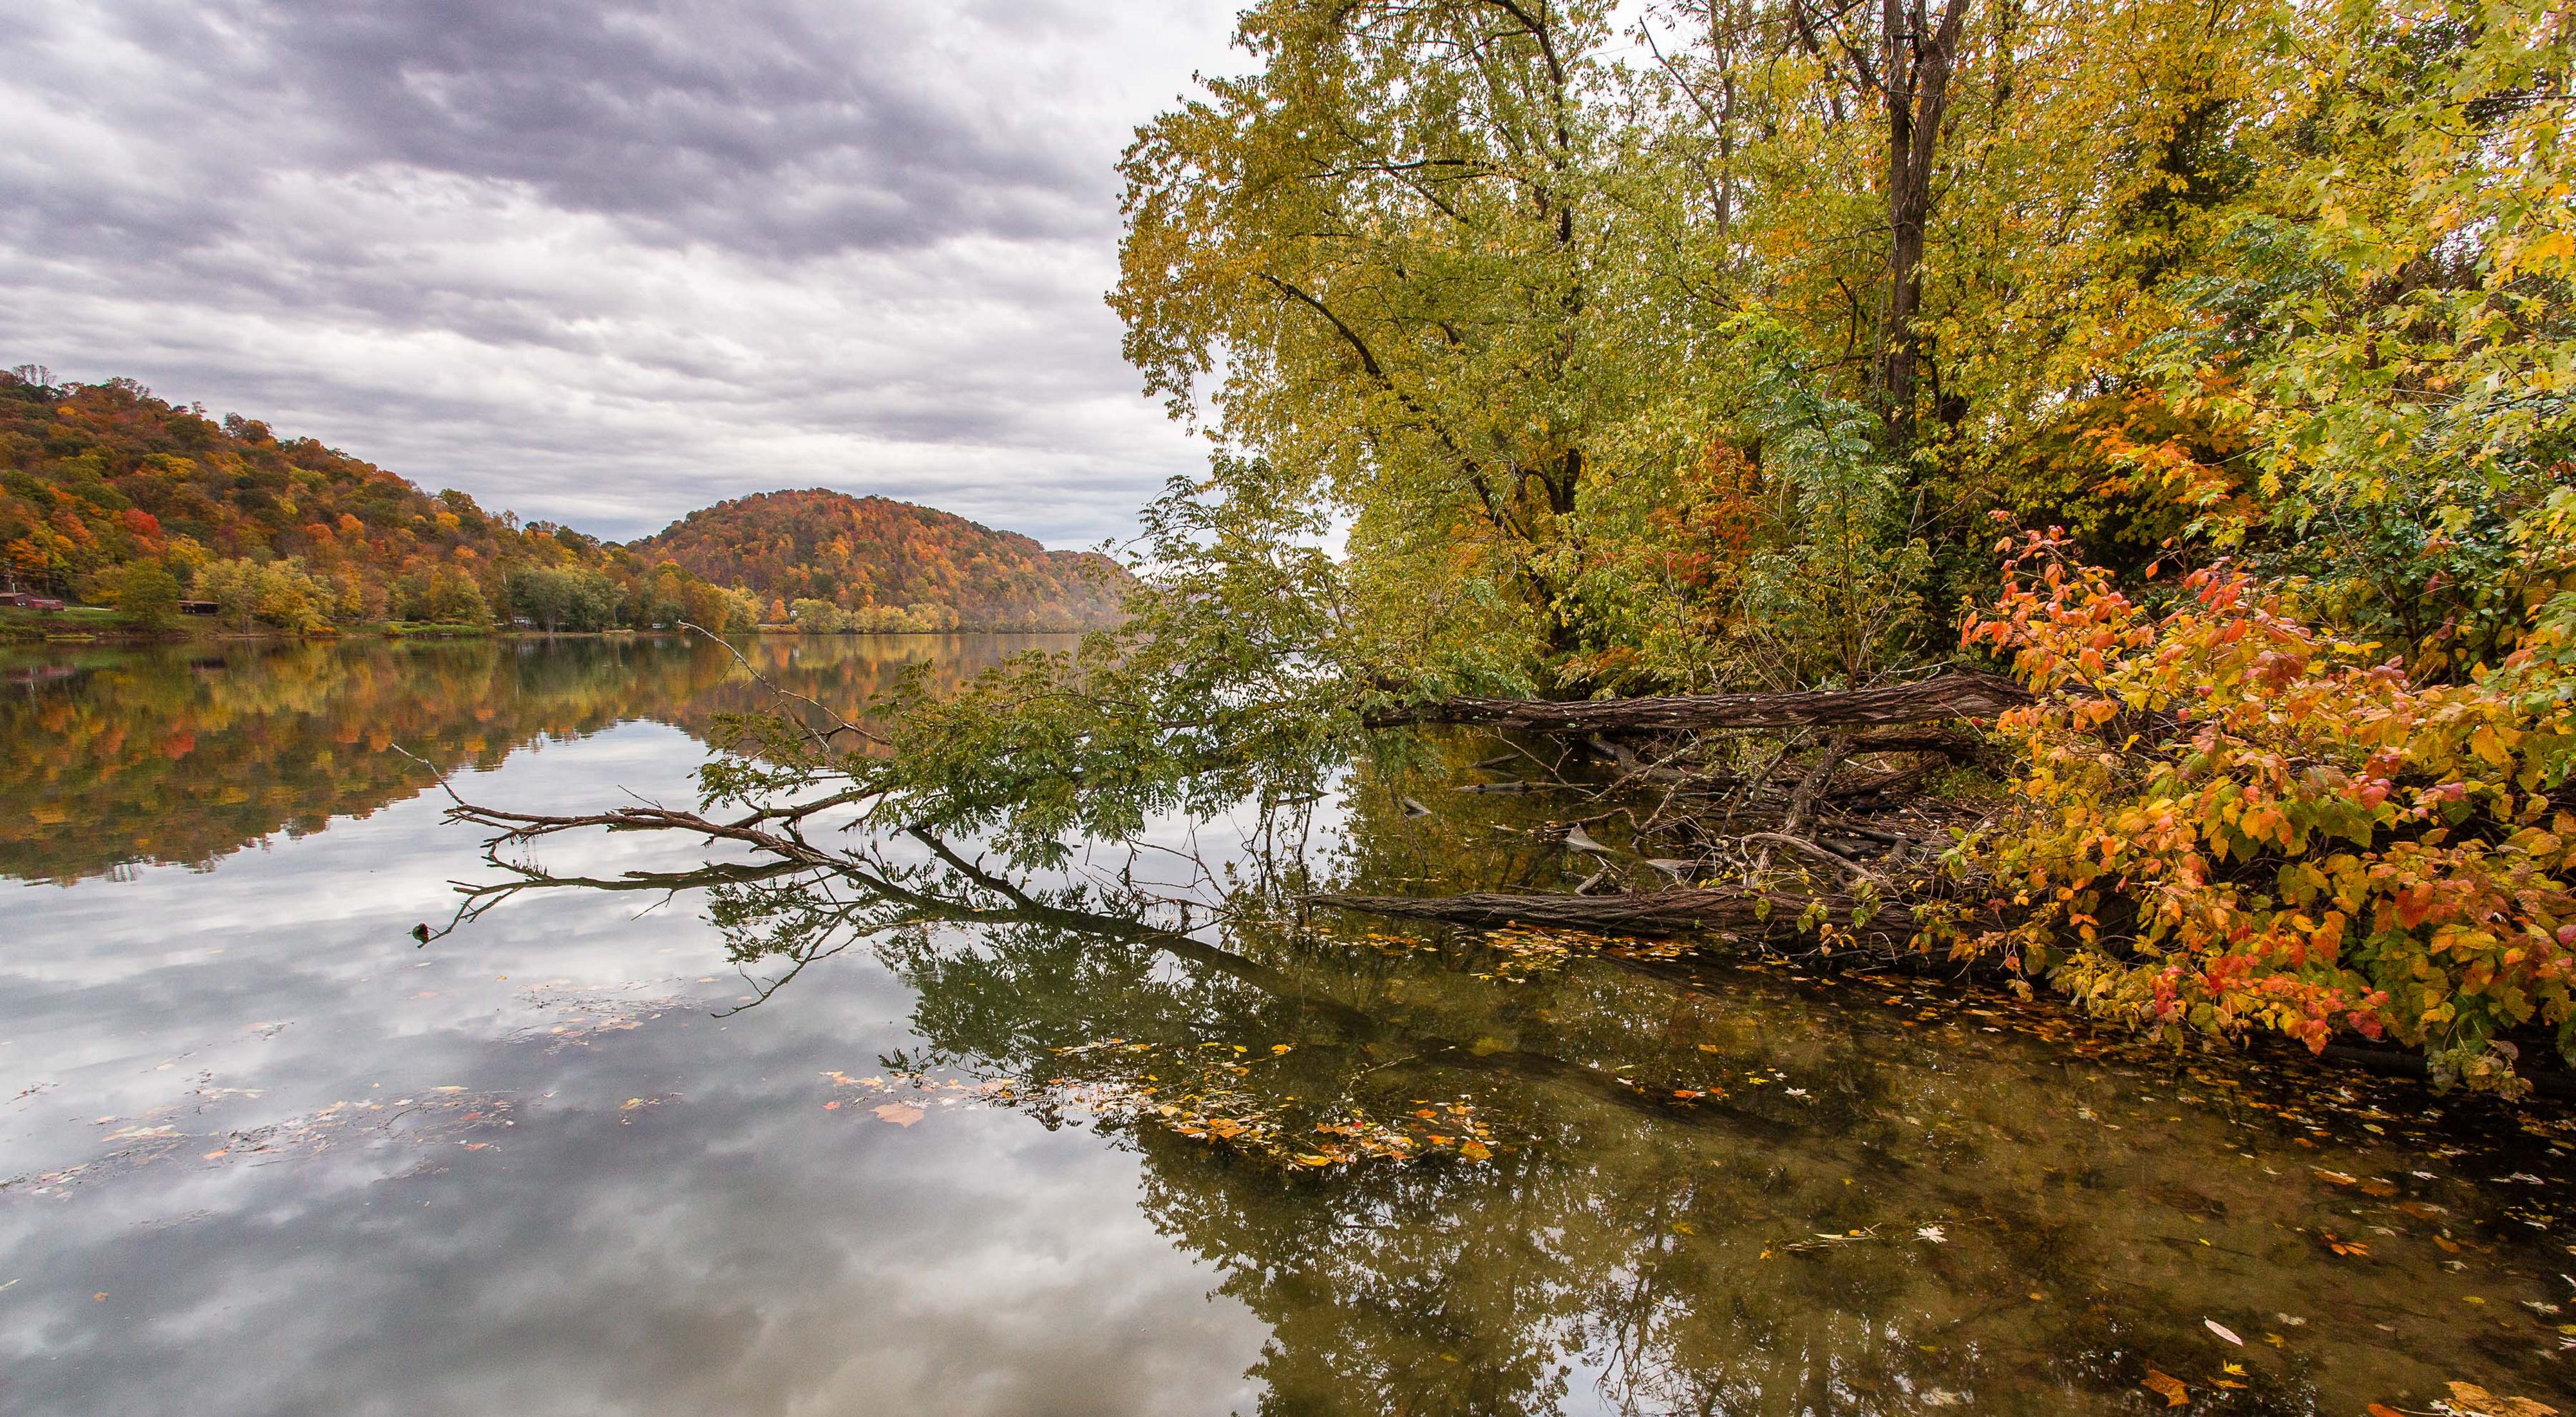 Looking downstream at calm waters of the Ohio River, trees overhanging the water with red, orange, yellow and green fall foliage.